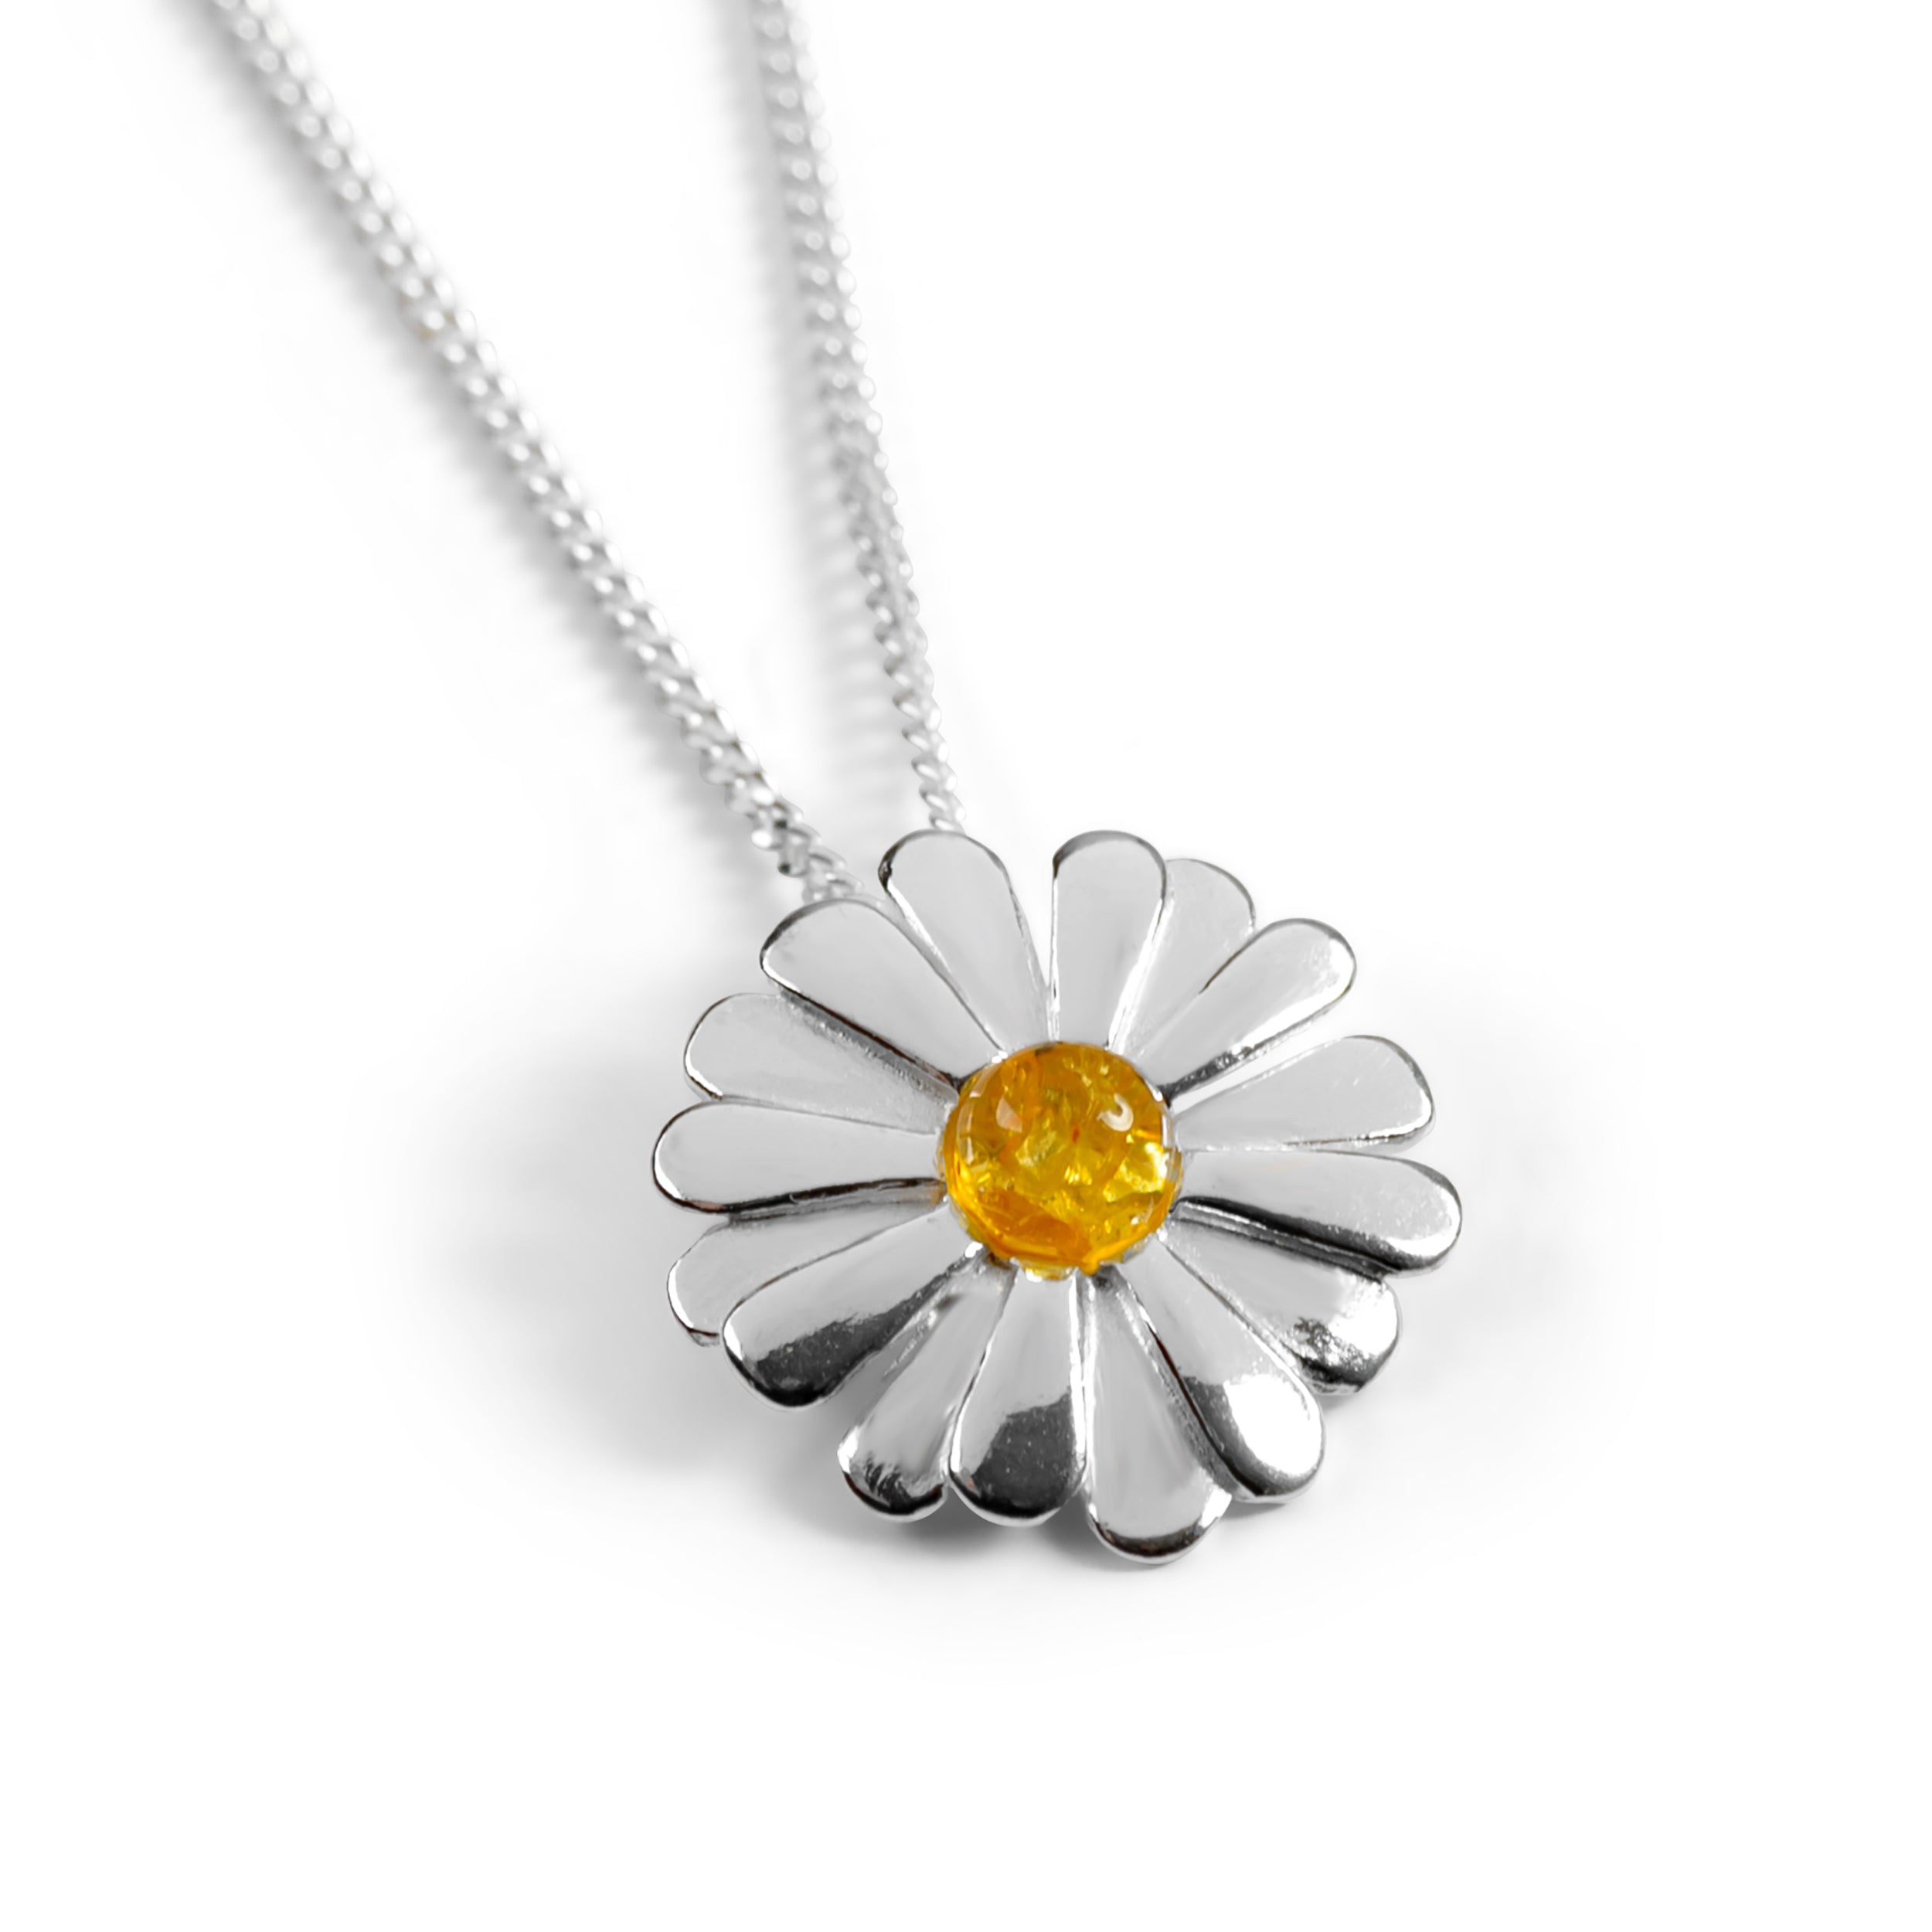 Solitary flower pendant necklace - Simple orchid bridal necklace - Style  #2420 | Twigs & Honey ®, LLC